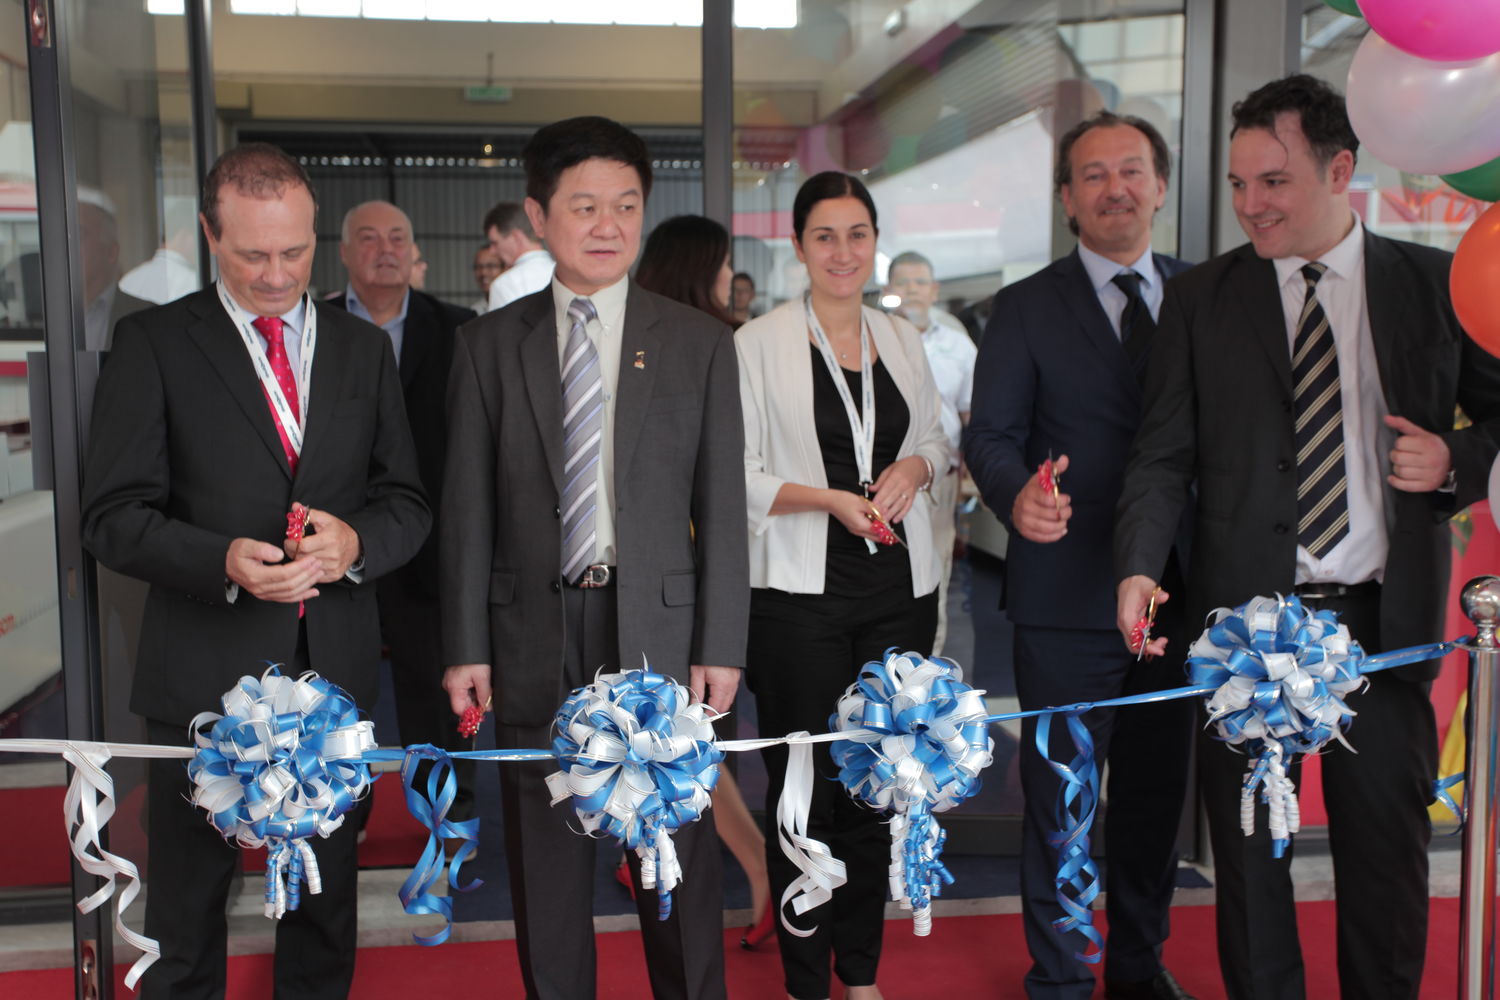 Impressive new opening of the Scm Group Malaysia subsidiary, designed to serve South East Asia.